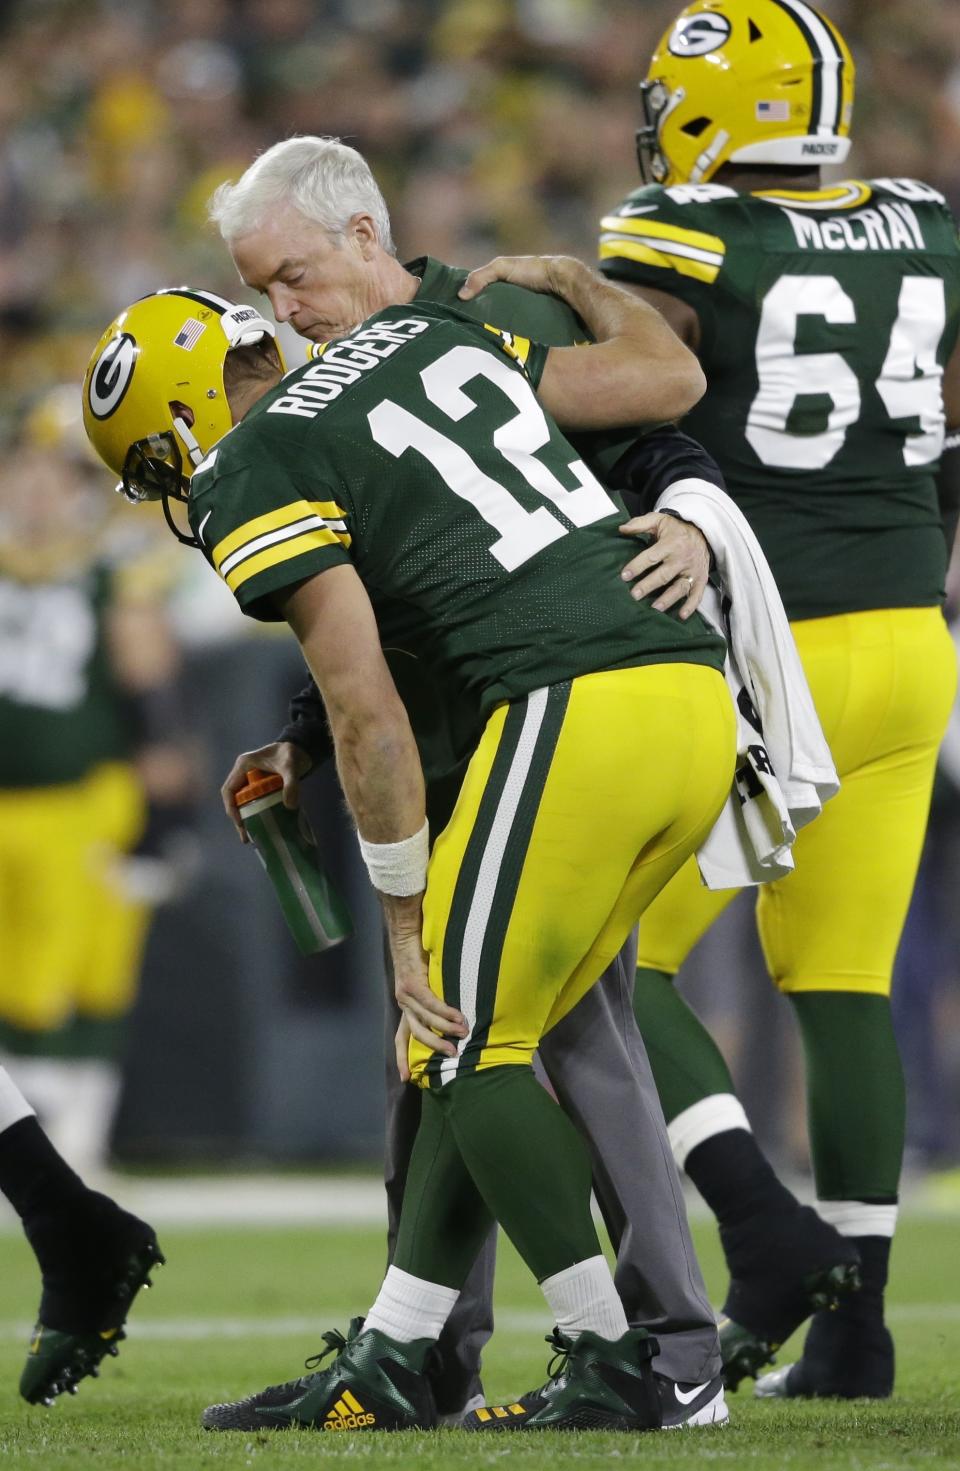 Green Bay Packers quarterback Aaron Rodgers is hurt after being sacked during the first half of an NFL football game against the Chicago Bears Sunday, Sept. 9, 2018, in Green Bay, Wis. (AP Photo/Jeffrey Phelps)